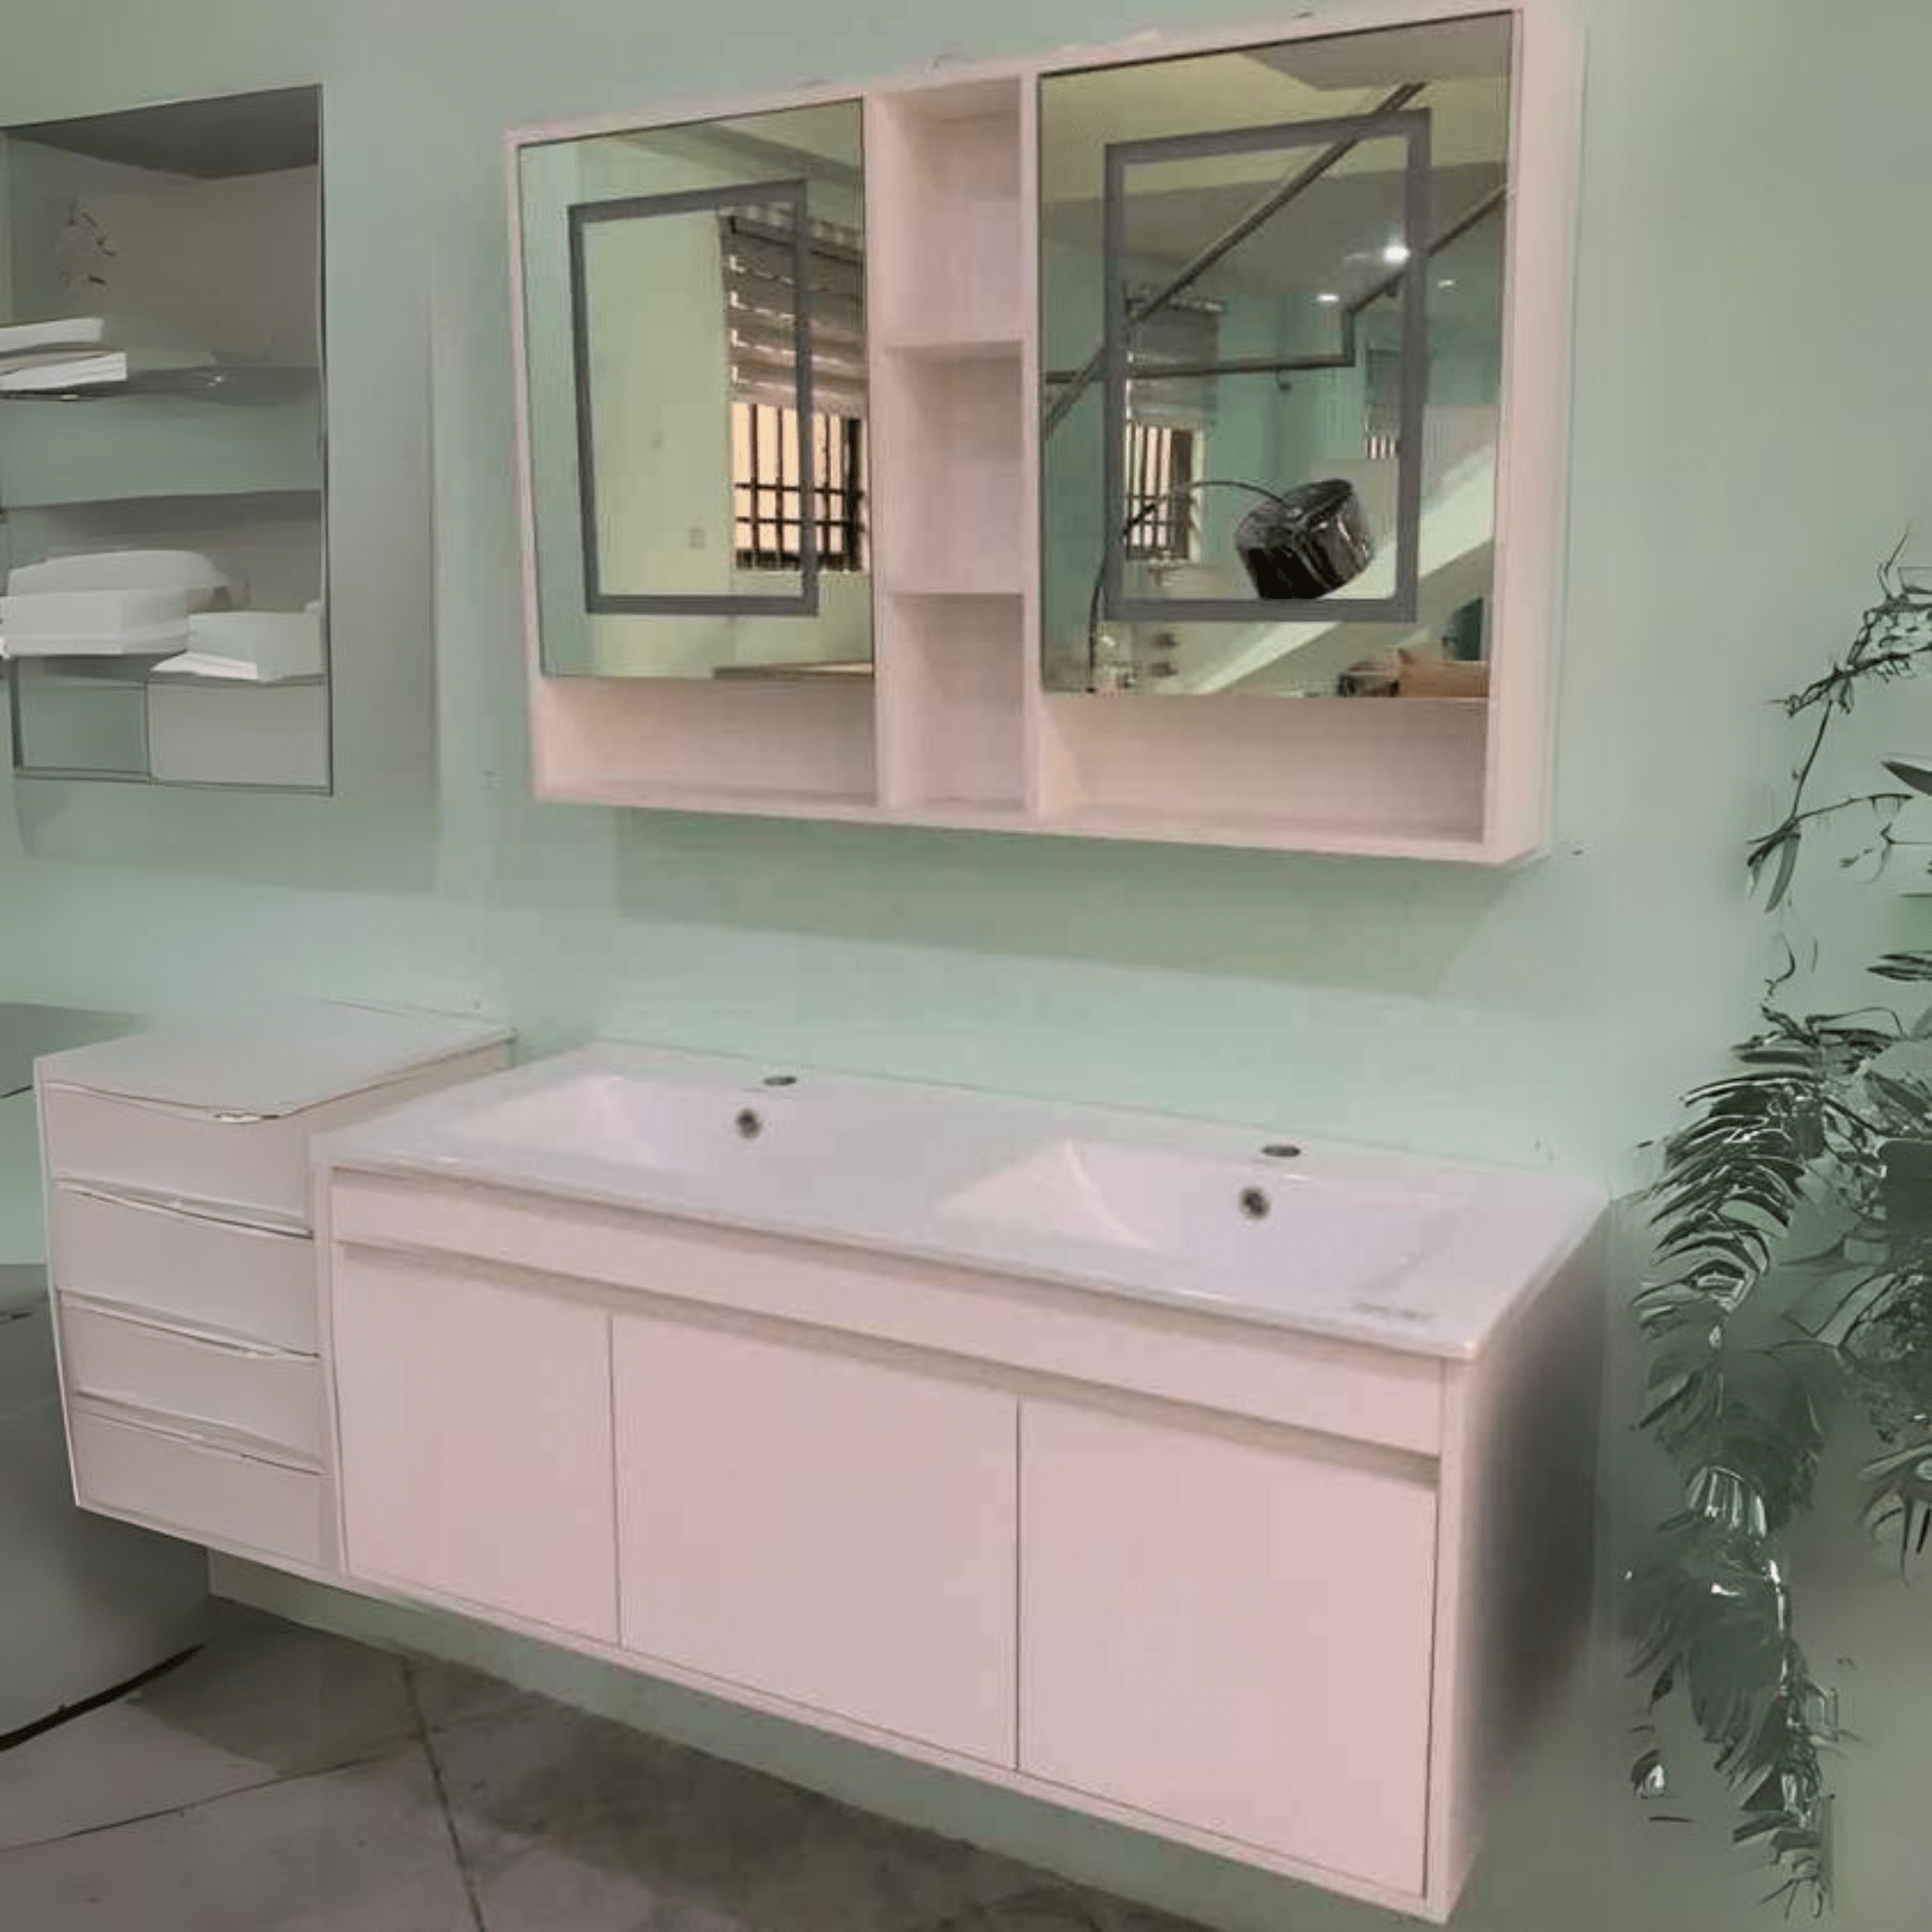 Buy Bathroom Luxury 120cm Double Basin Wall-Mounted Vanity Cabinet with Mirror - ZB5579 | Shop at Supply Master Accra, Ghana Bathroom Vanity & Cabinets Buy Tools hardware Building materials